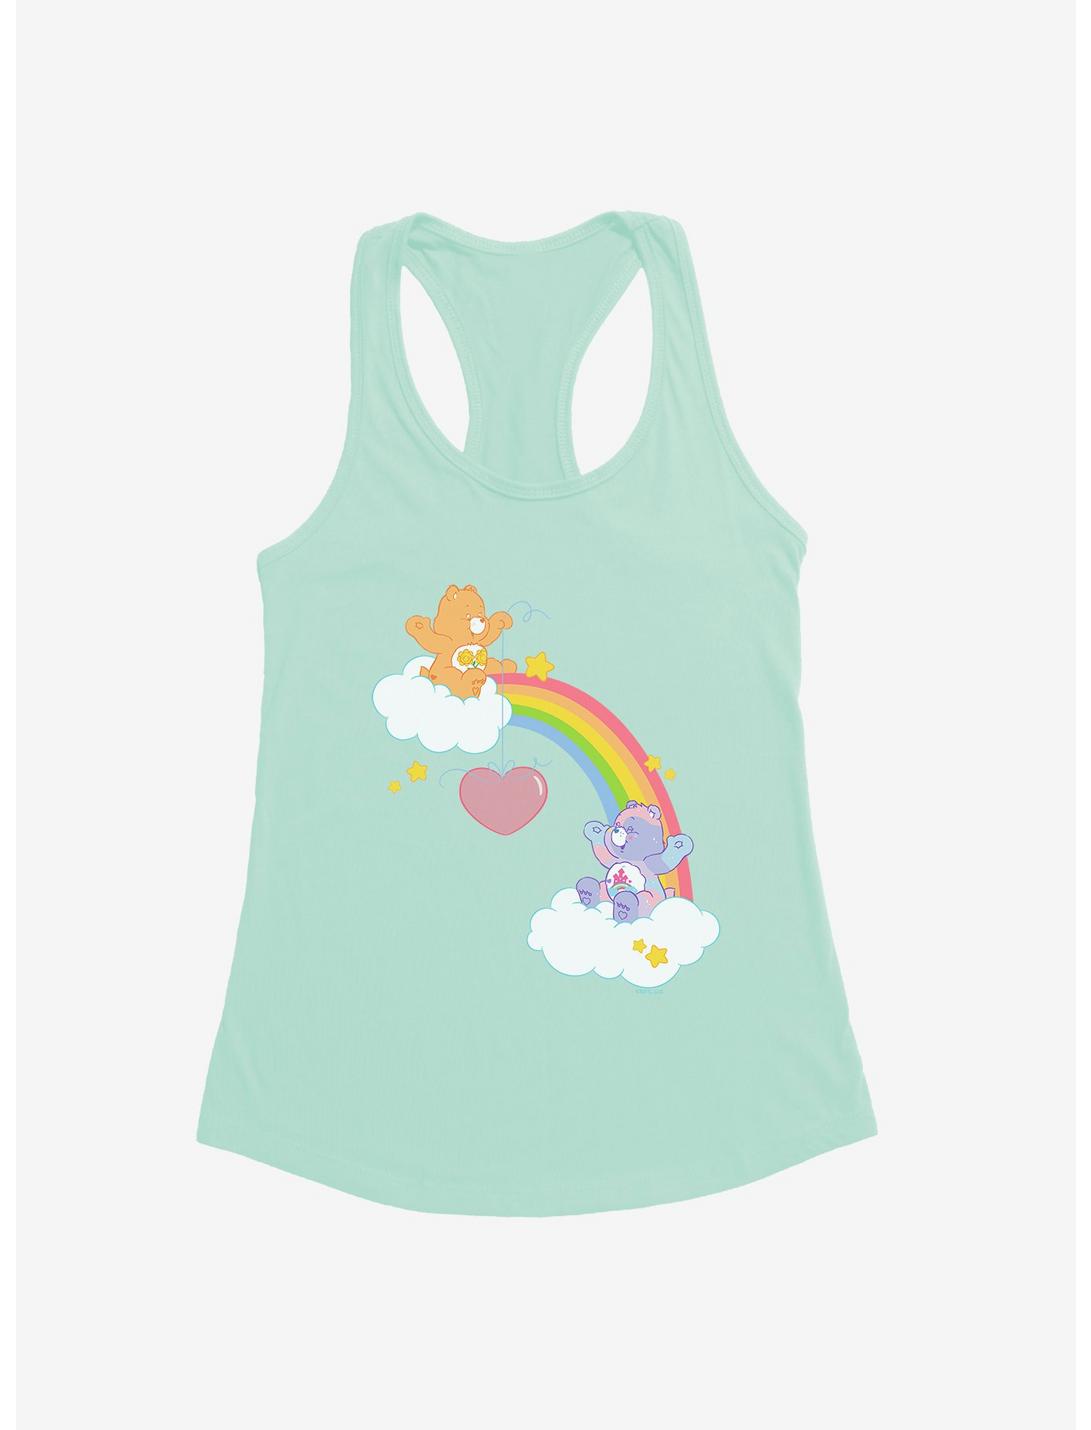 Care Bears Share The Love Girls Tank, MINT, hi-res